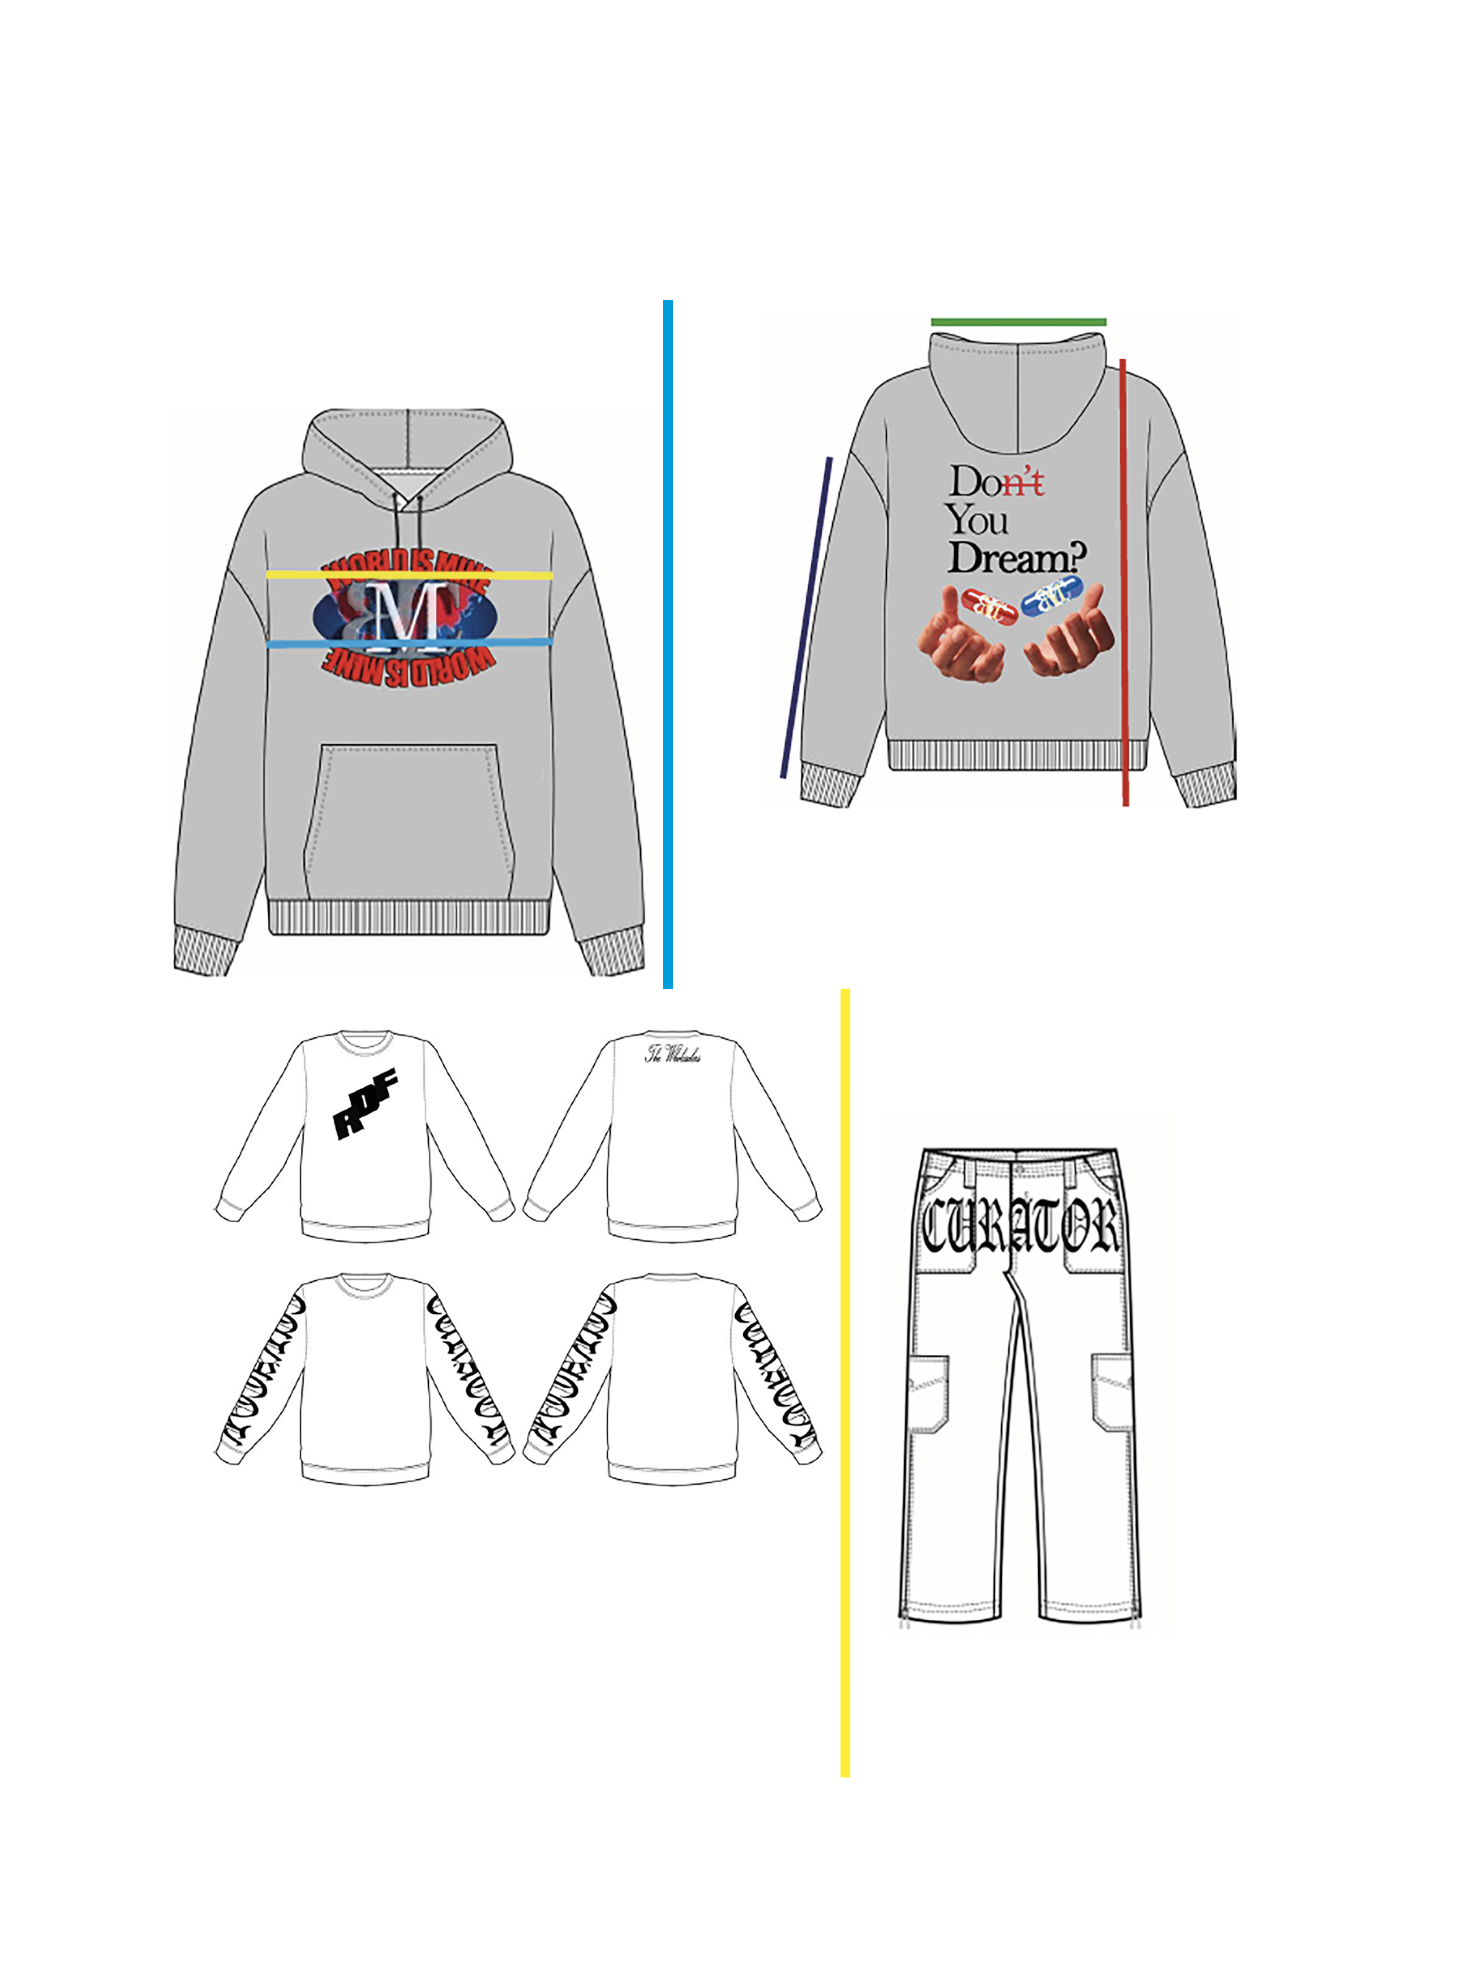 concept illustrations for a streetwear design